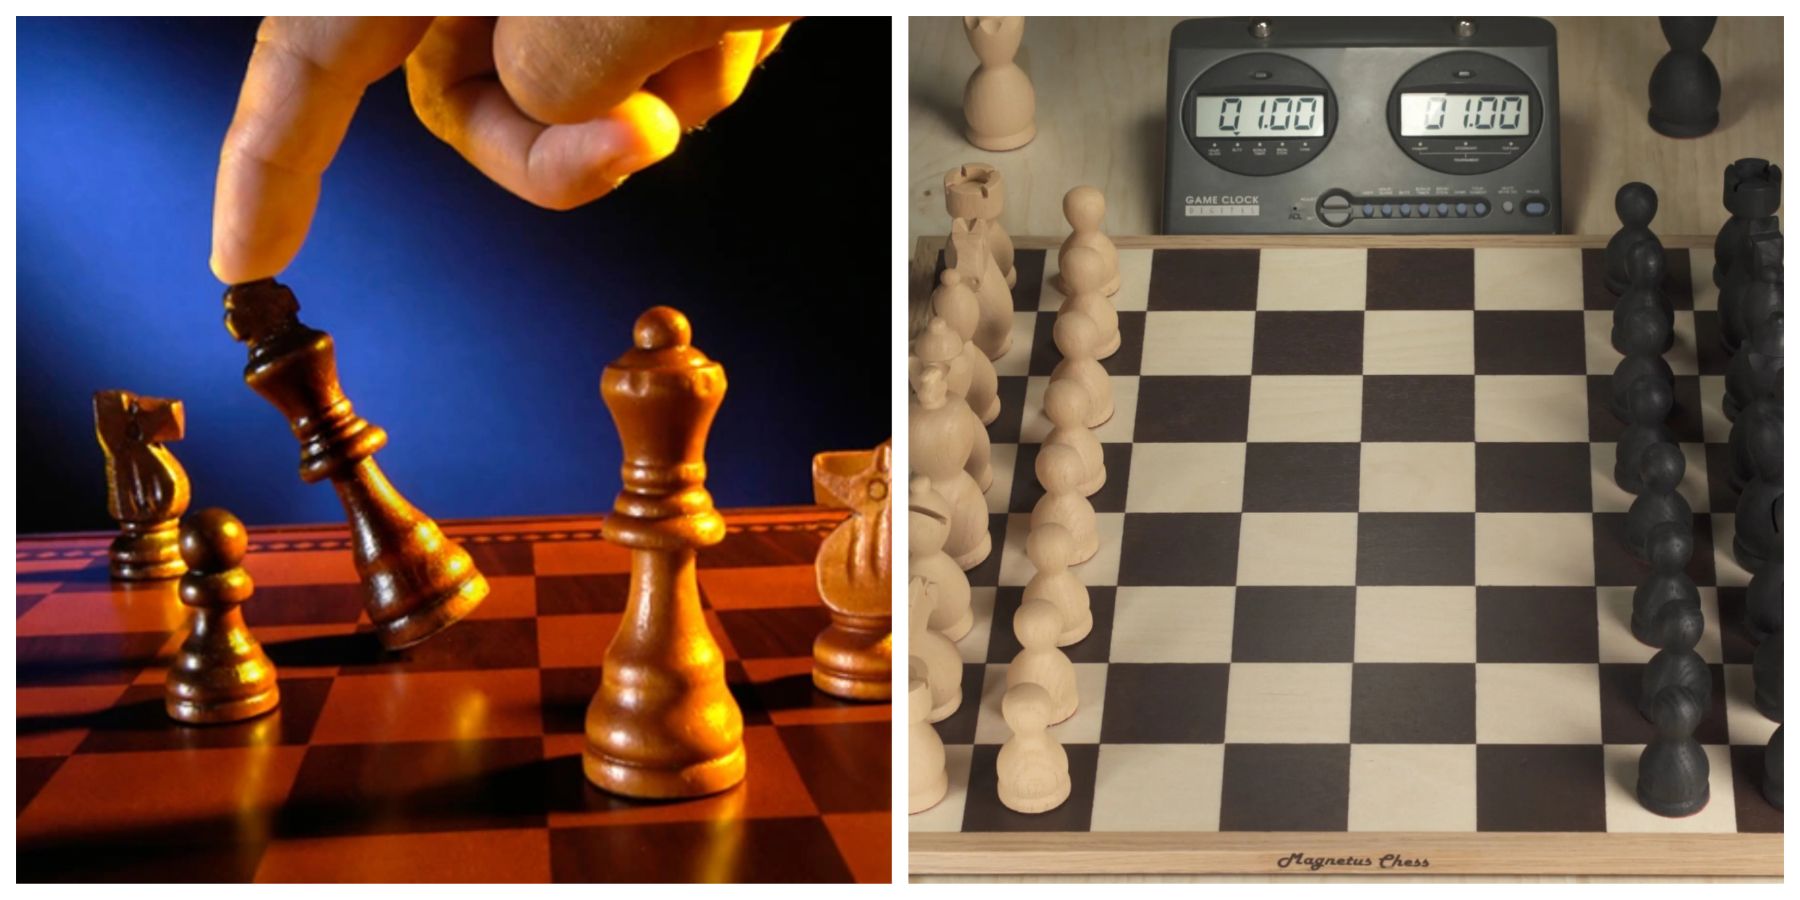 (Left) King being pushed (Right) Chess game setup with clock